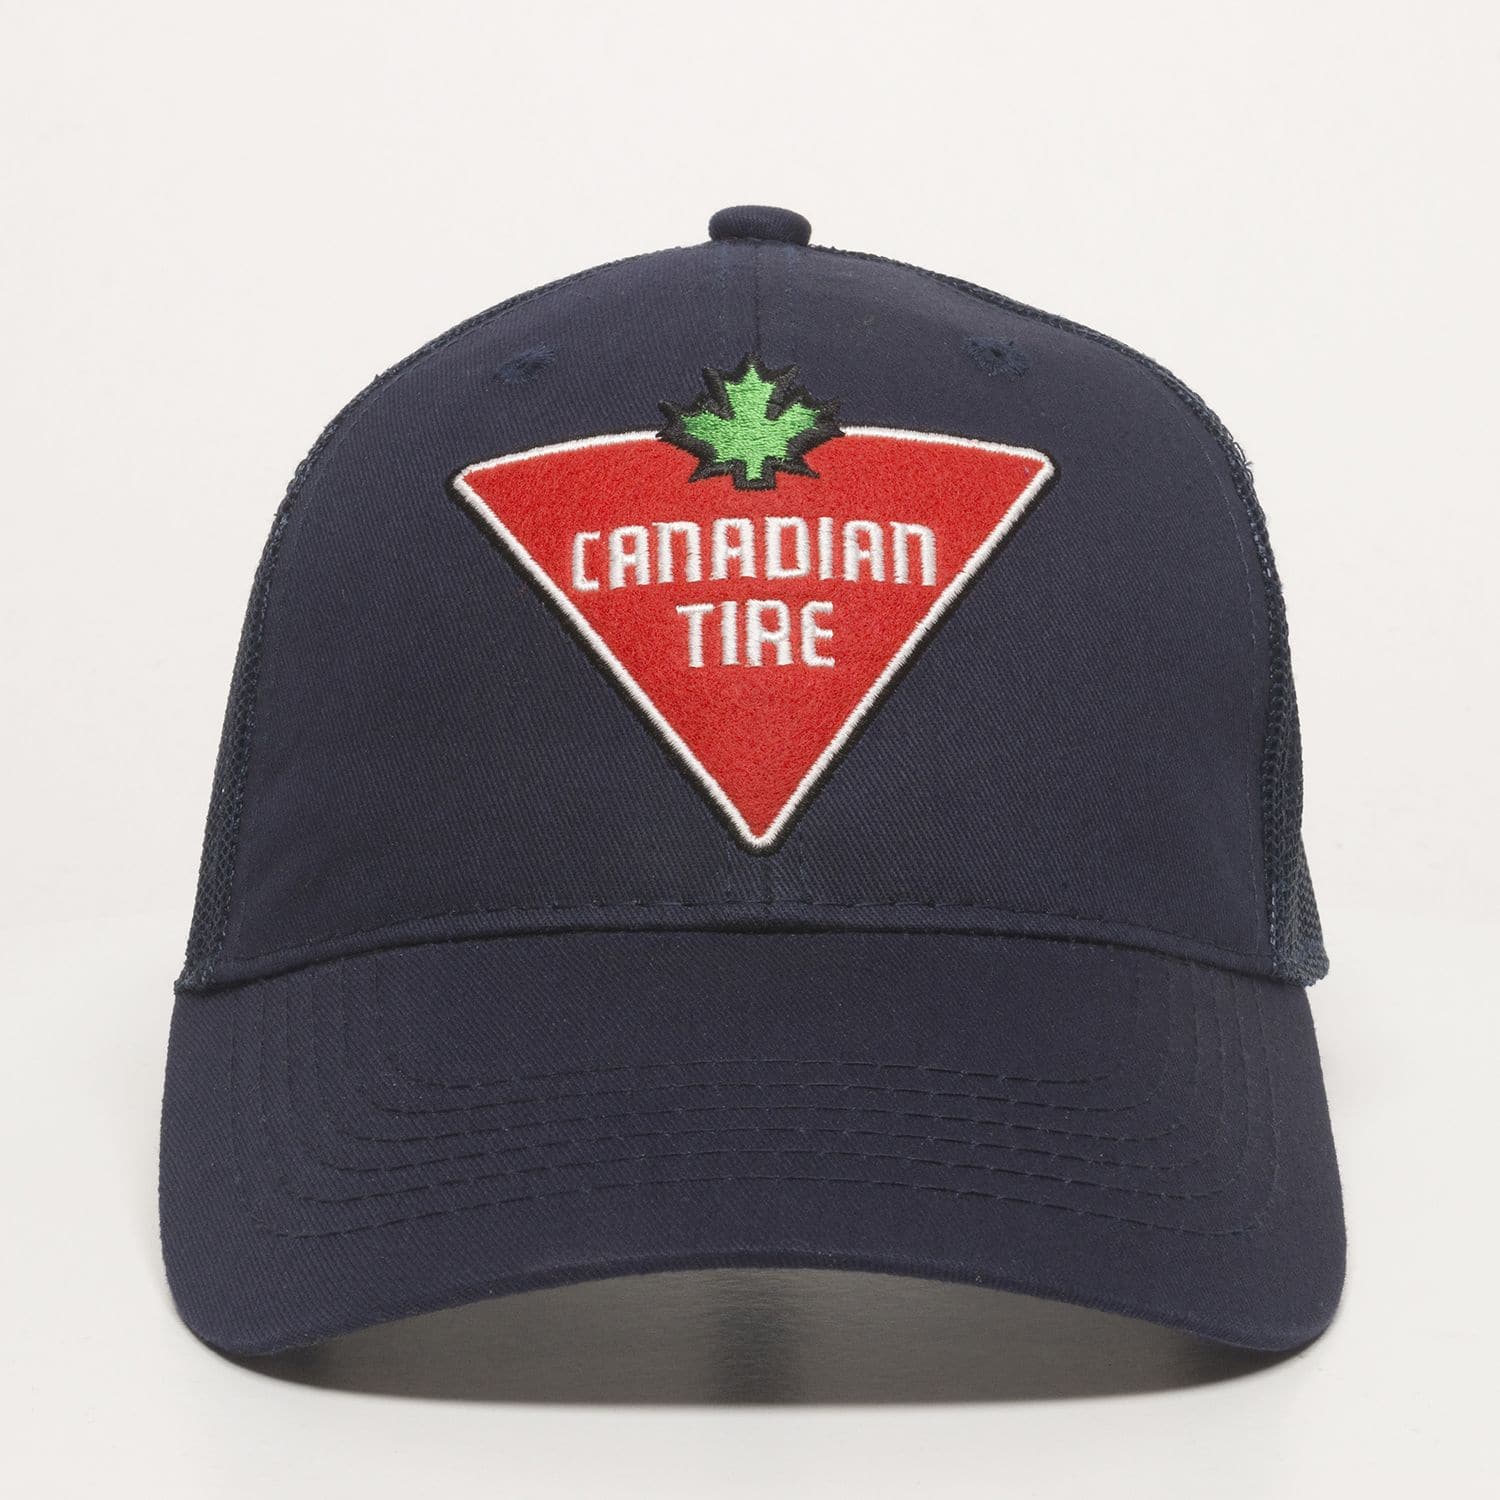 Canadian Tire Hunting Mesh Back Baseball CaP with Adjustable Closure for  Secure Fit, Navy